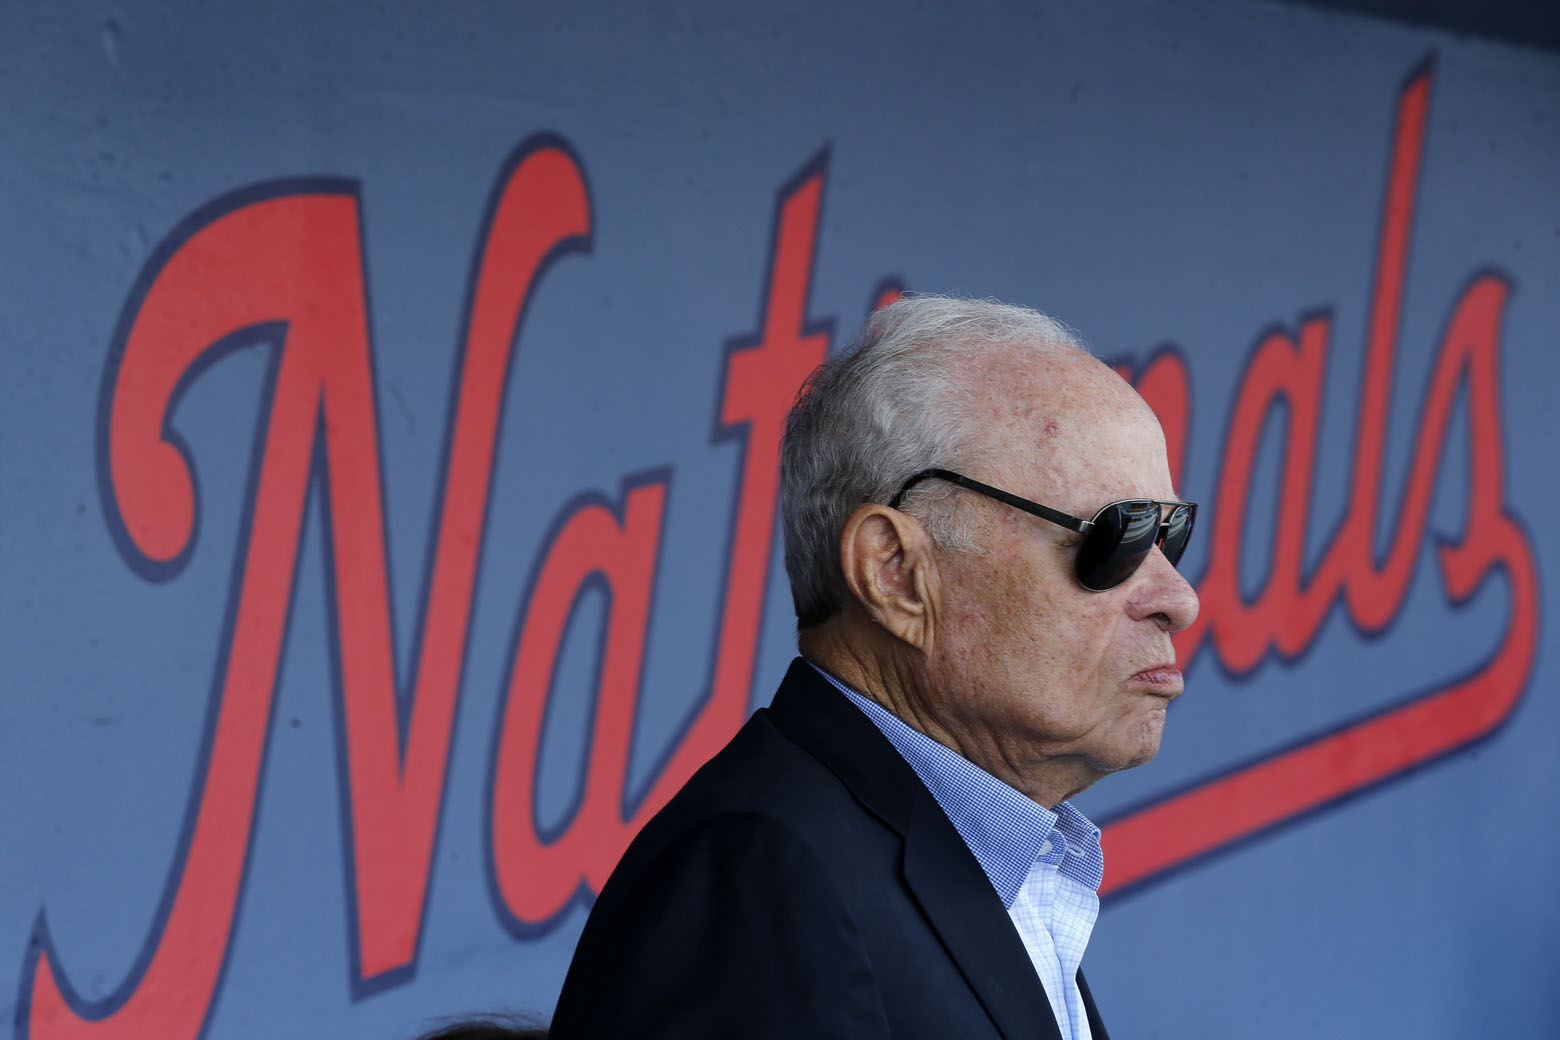 FILE - Washington Nationals owner Ted Lerner is shown in the dugout before a spring training baseball game against the Houston Astros, Feb. 28, 2017 in West Palm Beach, Fla. Washington Nationals founder Ted Lerner has died. He was 97. Lerner bought the team from Major League Baseball in 2006 for $450 million. He was managing principal owner until ceding that role to son Mark in 2018. (AP Photo/John Bazemore, file)